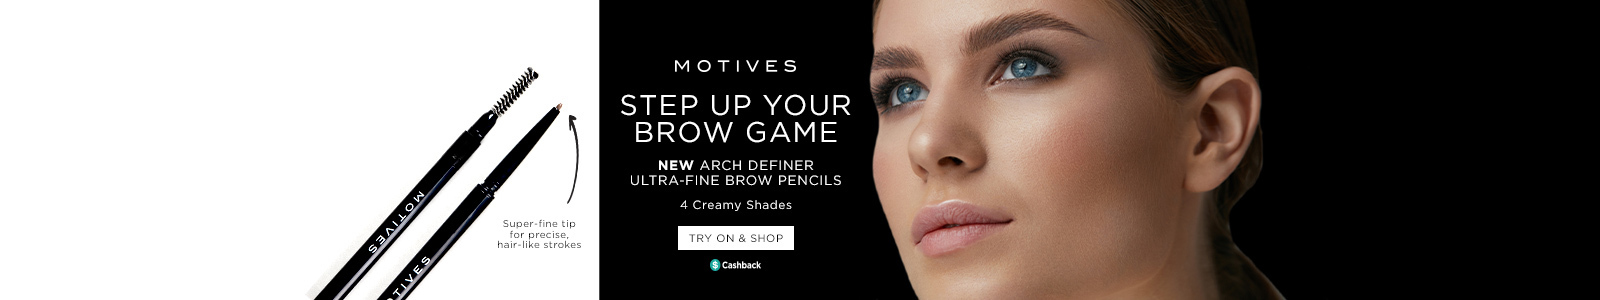 Motives. Steo up your brow game. New Arch Definer Ultra-Fine Brow Pencils. 4 creamy shades. Super-fine tip precise, hair-like strokes. Try On & Shop. Earn Cashback.